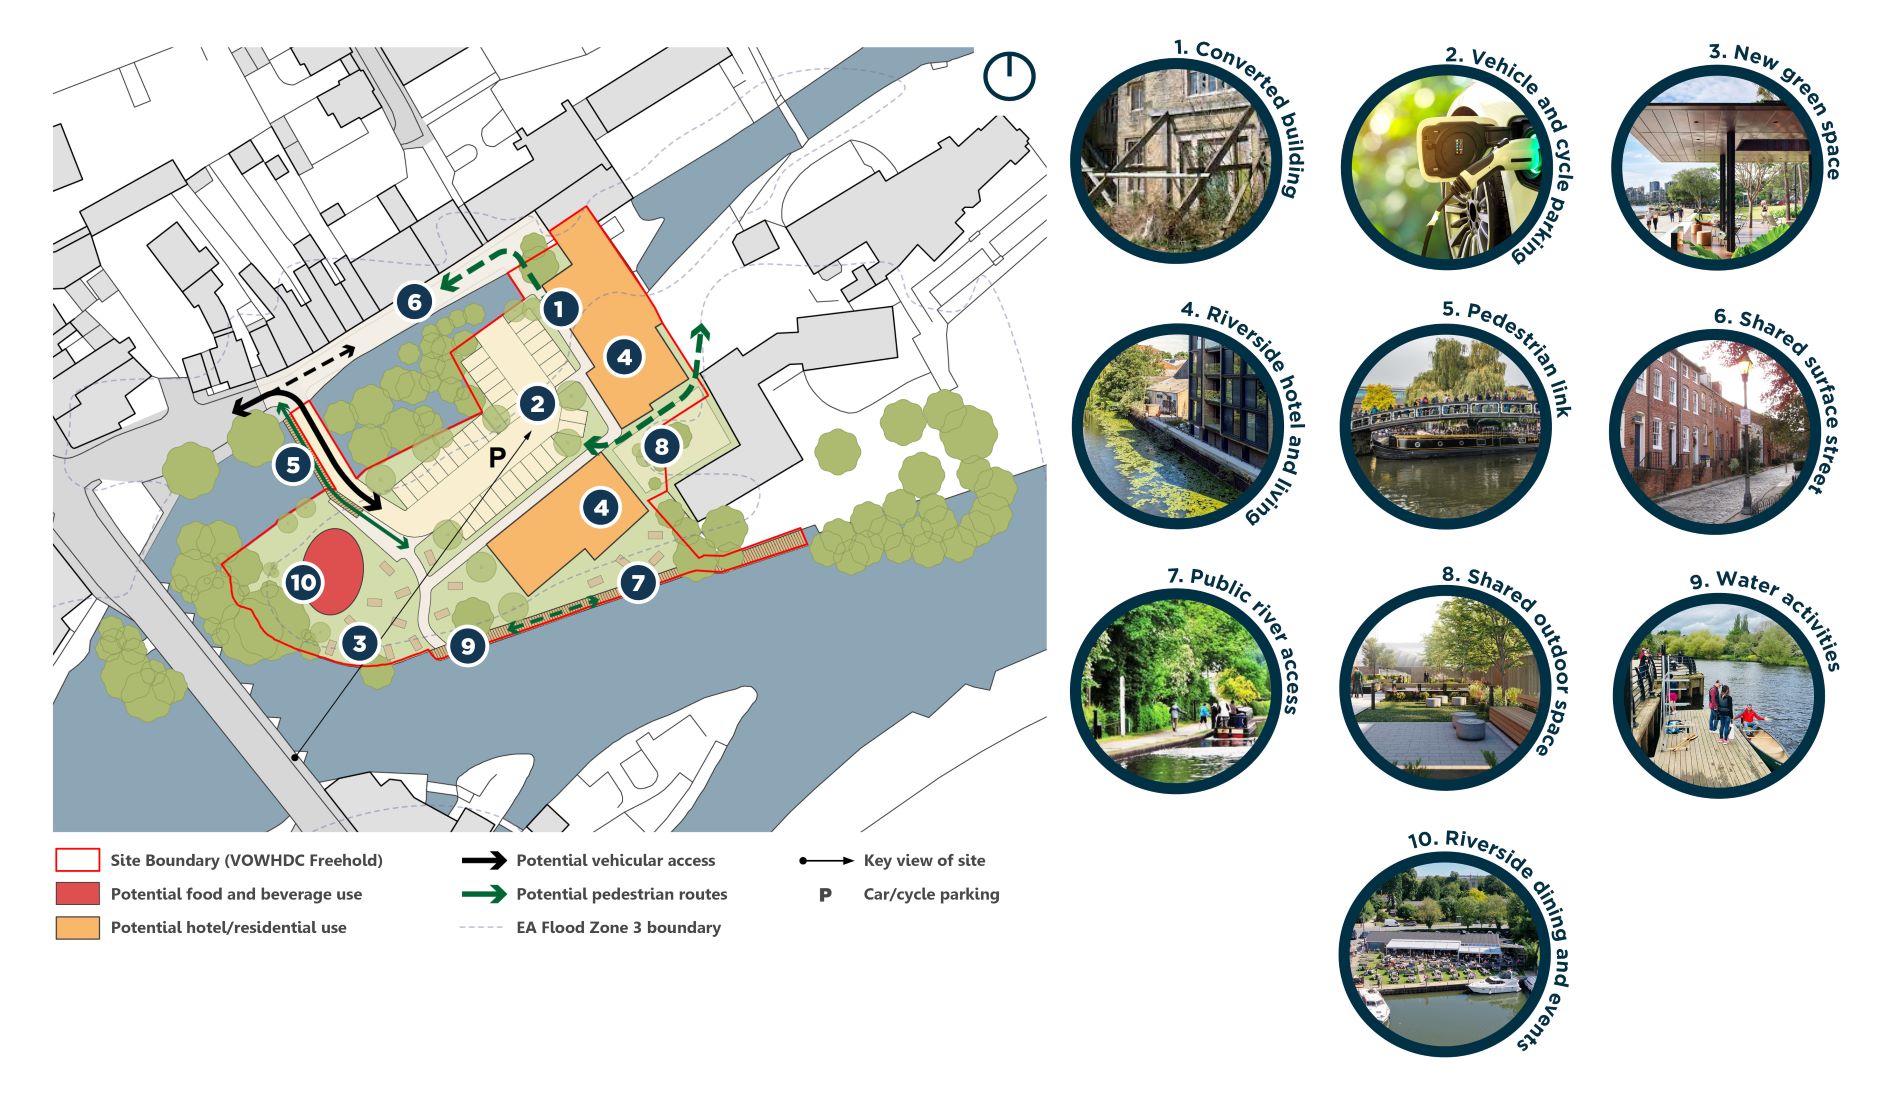 A concept plan of the Upper Reaches site showing potential uses and public realm improvements on the site. This includes shared surface streets along Thames Street, possible vehicular and pedestrian access through the existing bridge connecting the site to Thames Street, access to the riverfront, a possible new pavilion to the west of the site with potential food and beverage use and partial redevelopment of the existing building to the east of the site as hotel and residential use. There are 10 images related to possible uses and features for the site including: 1. Converted building, 2. Vehicle and Cycle Parking, 3. New green space, 4. Riverside hotel and living, 5. Pedestrian links, 6. Shared surface streets, 7. Public river access, 8. Shared outdoor space, 9. Water activities, 10. Riverside dining and events.